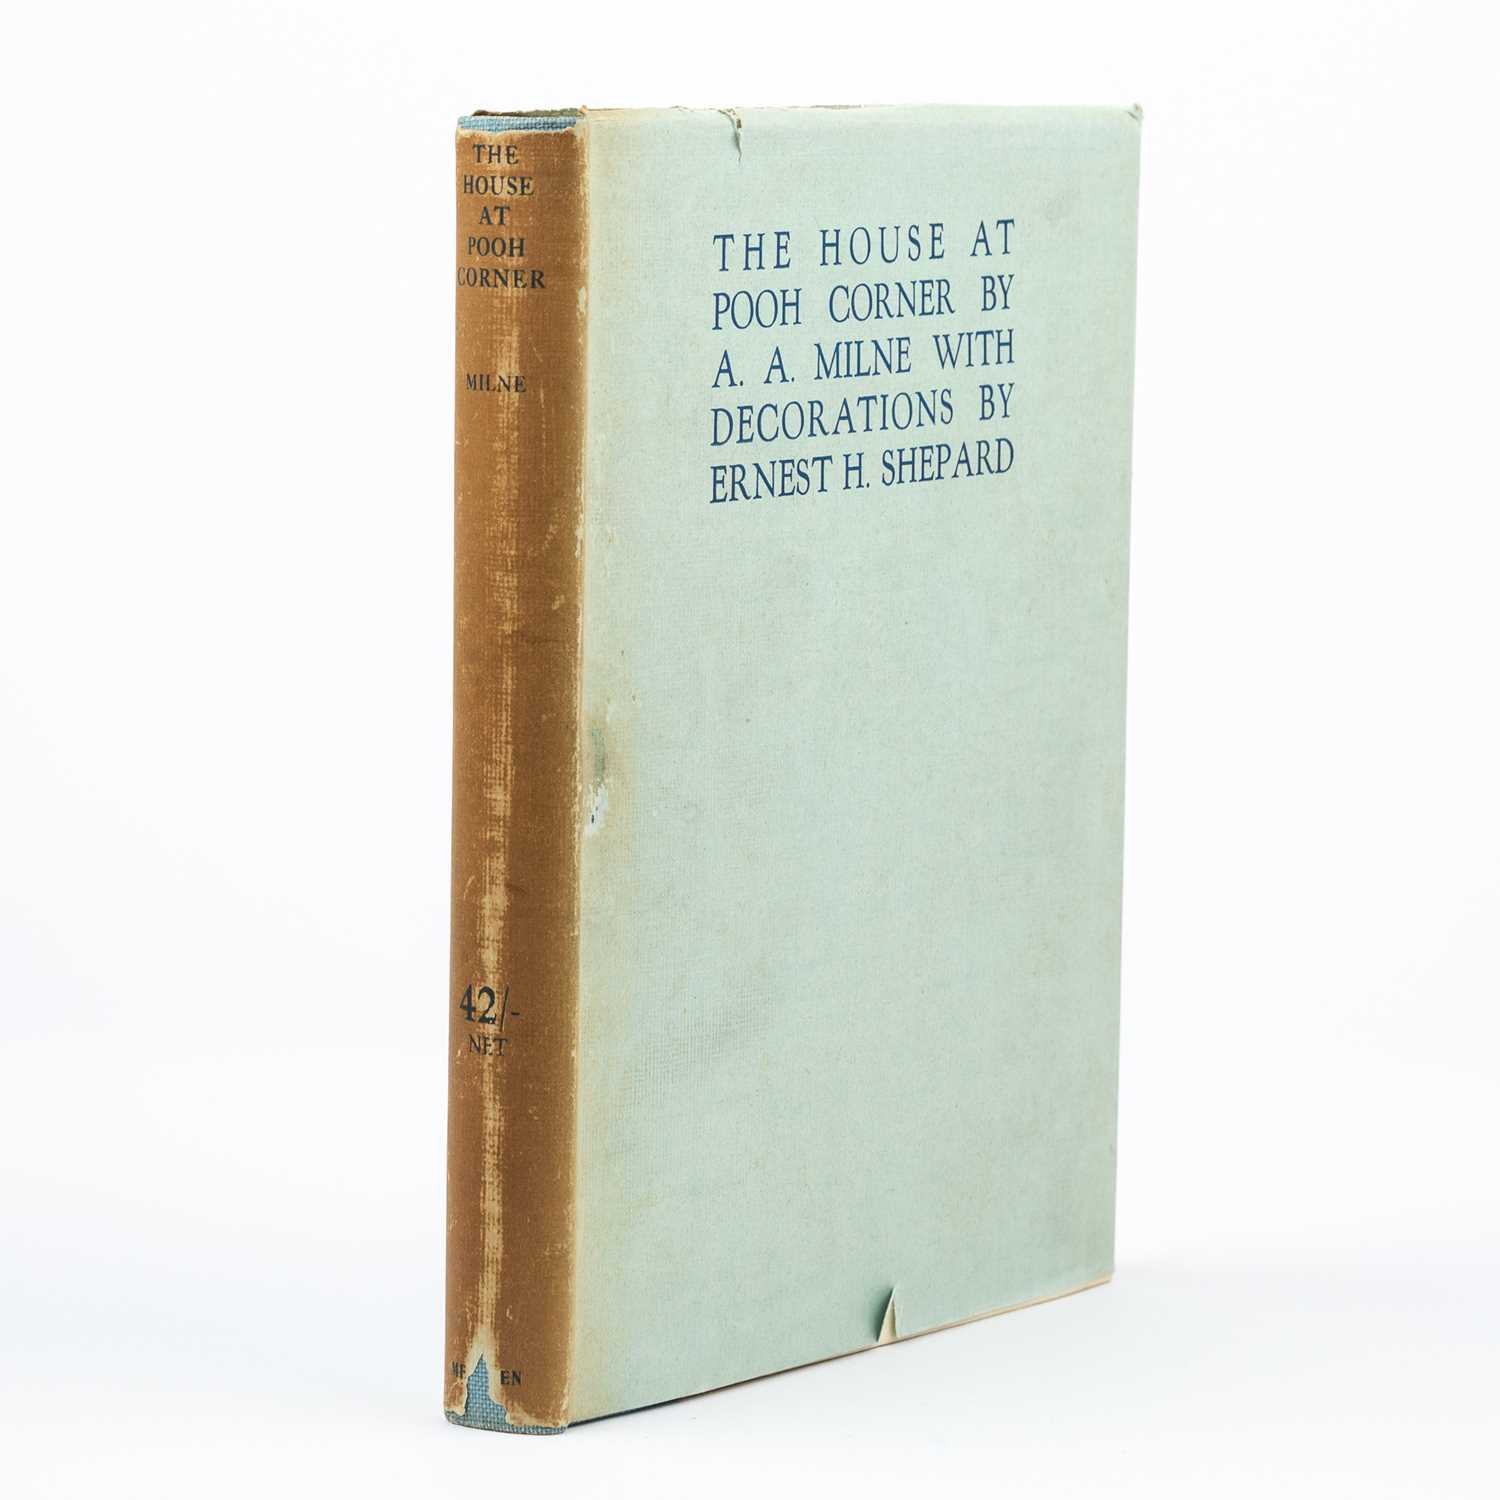 Lot 195 - The signed limited first edition of The House at Pooh Corner